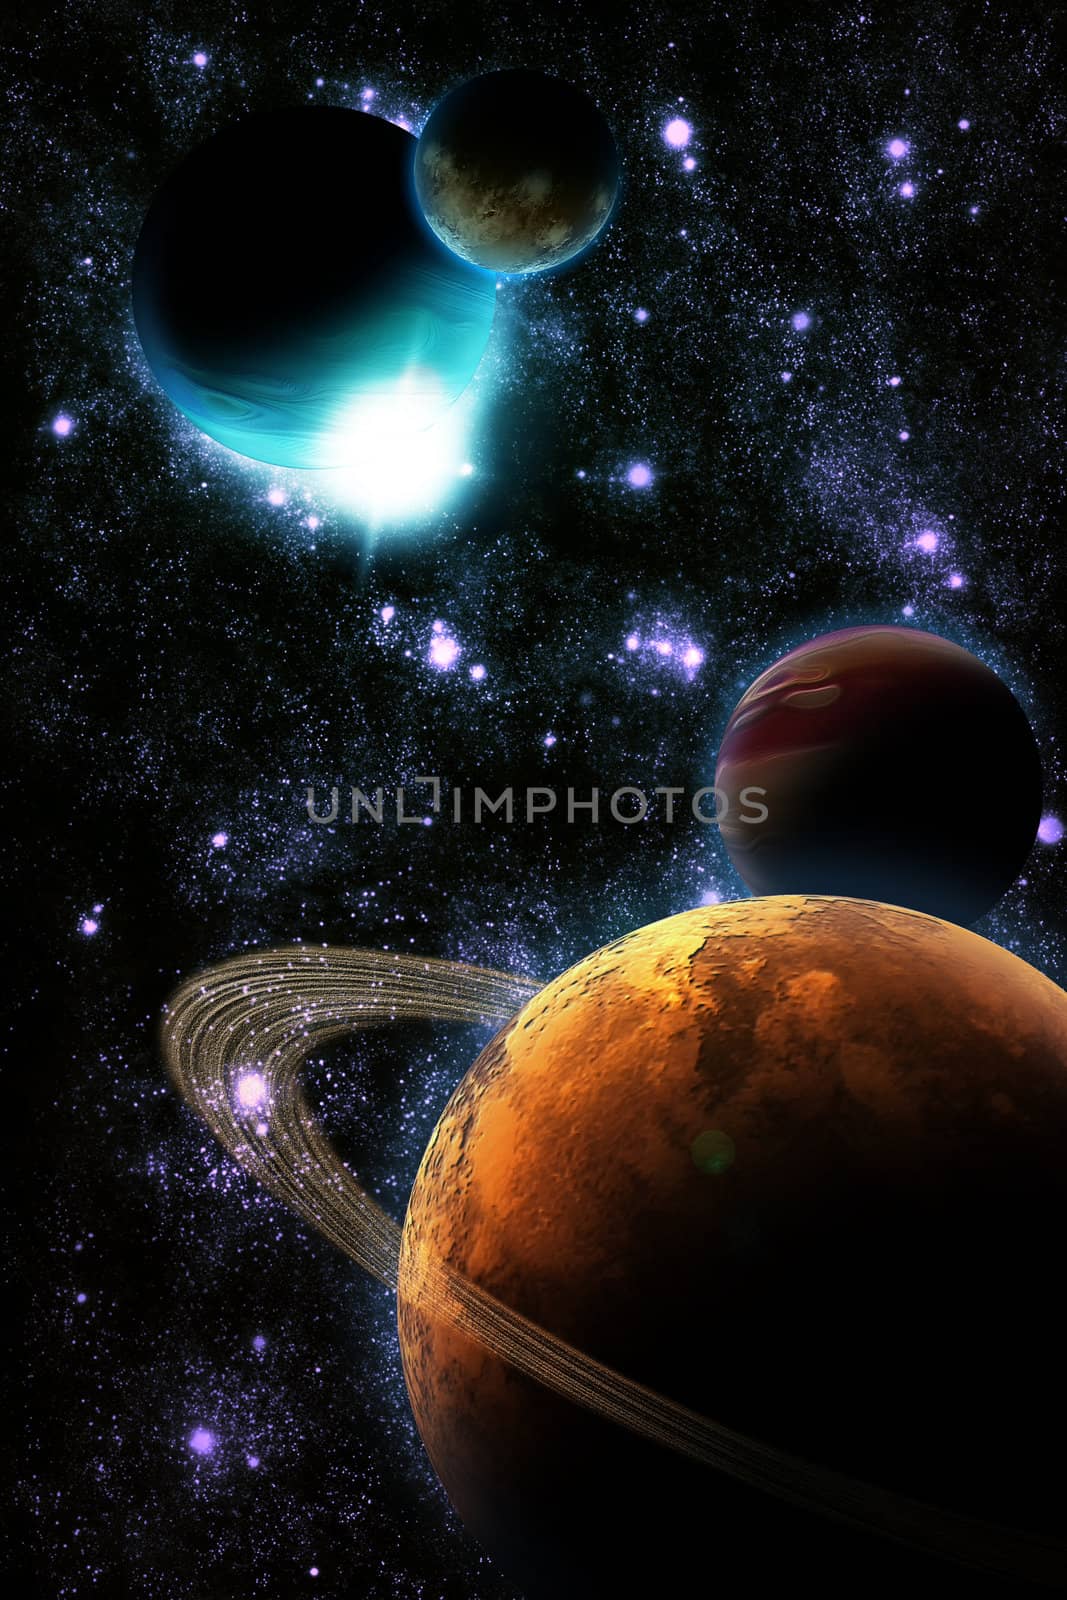 Abstract planet with sun flare in deep space - star nebula again by mozzyb